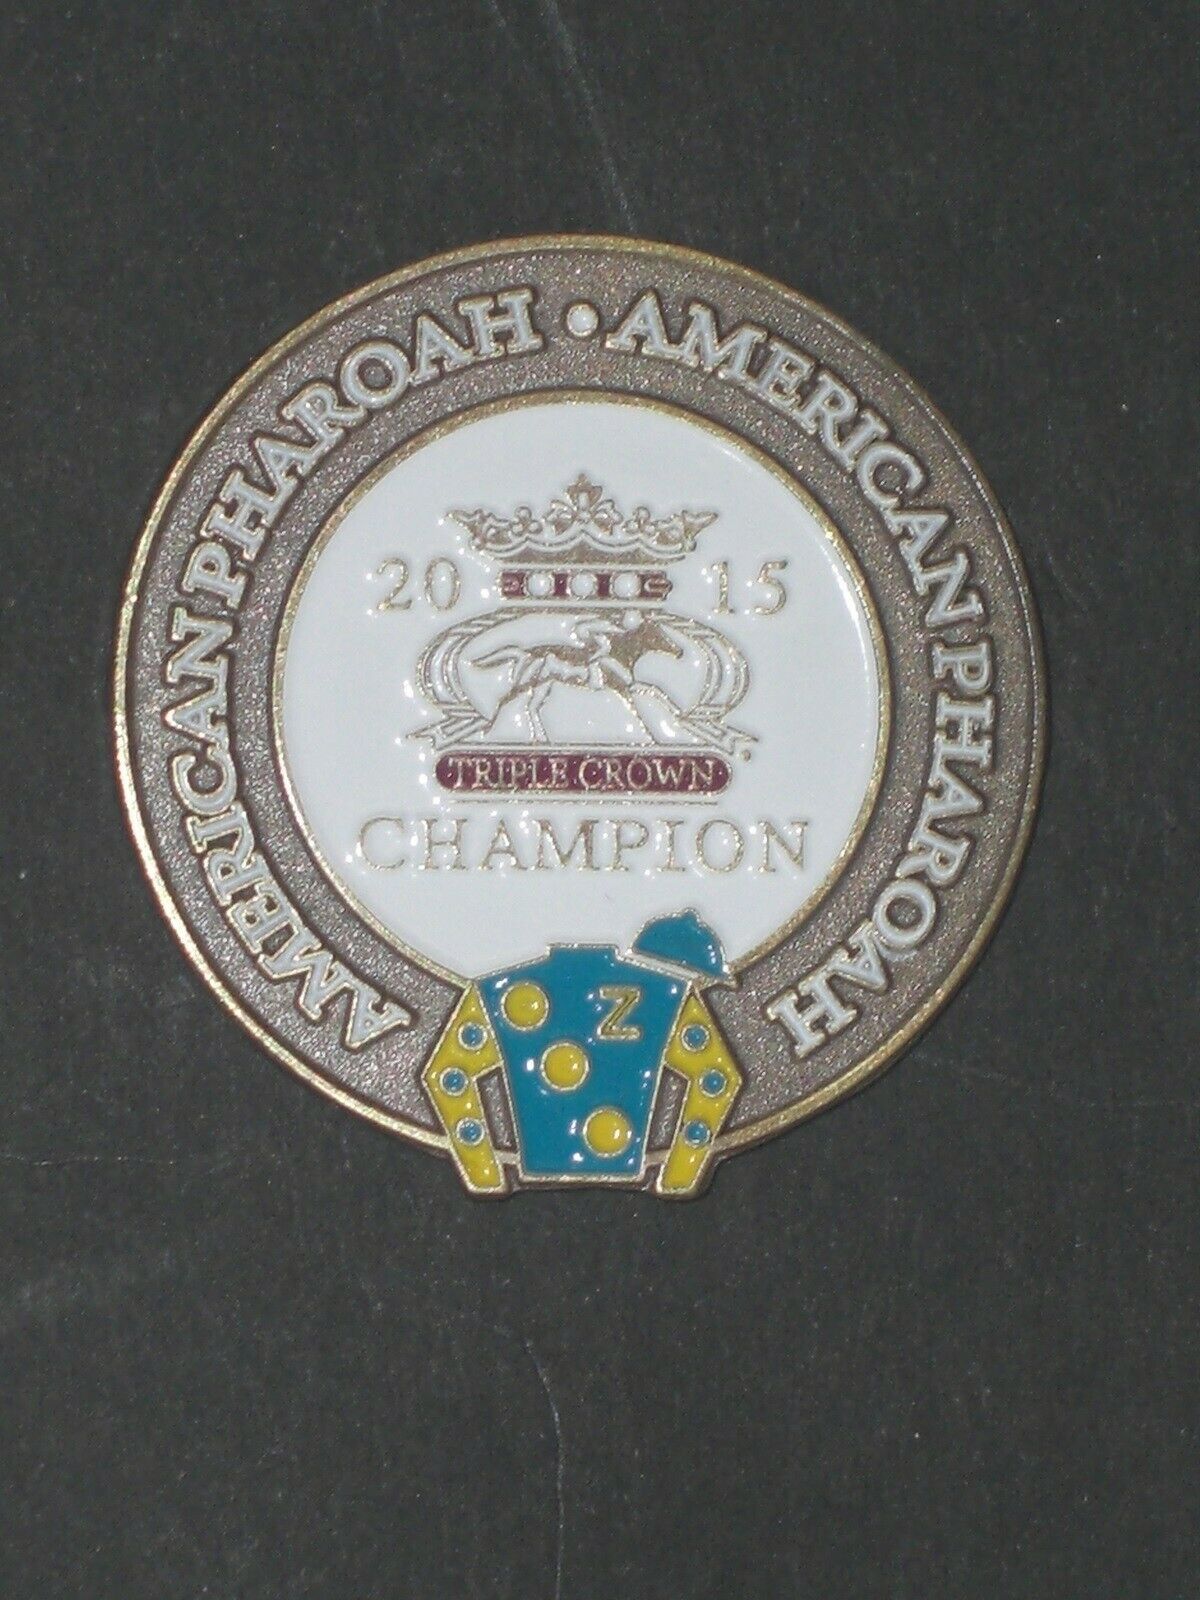 2015 - American Pharoah - Triple Crown Champion Pin - New - Only 2015 Made